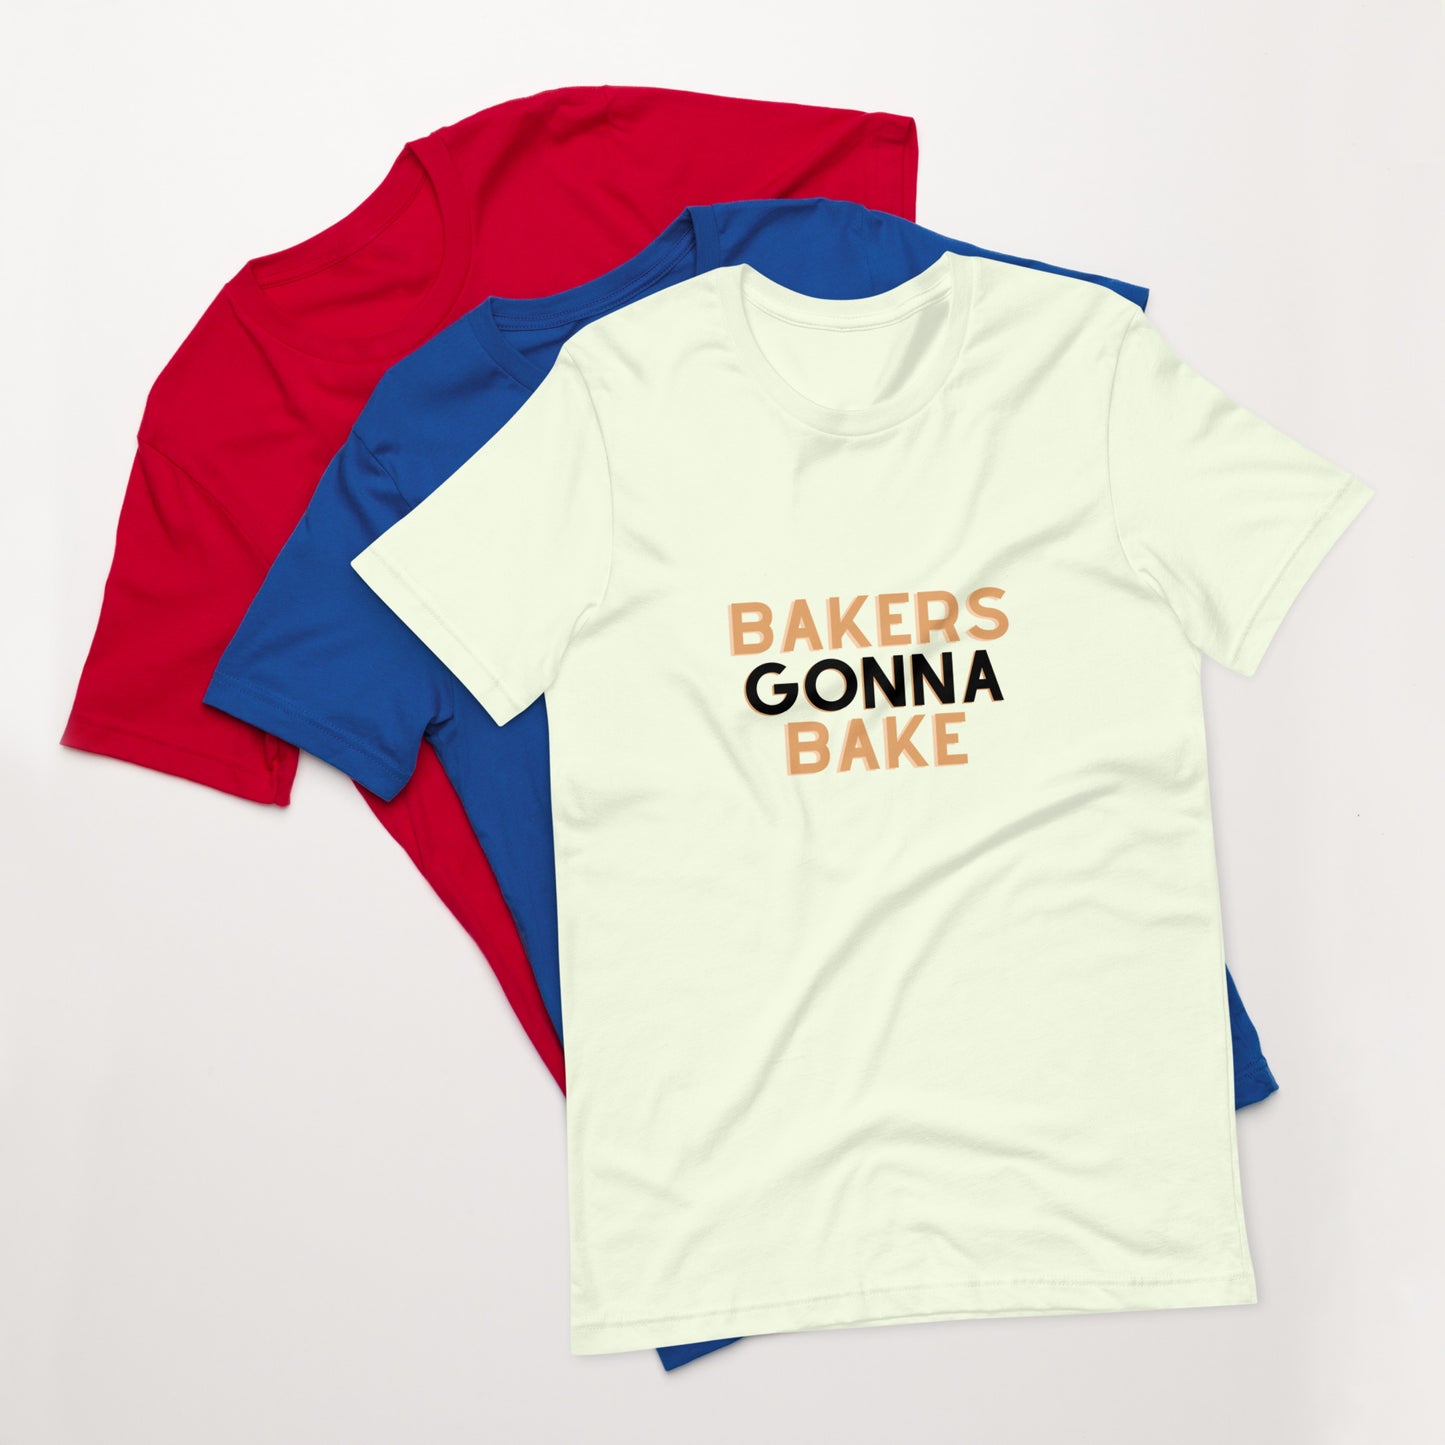 "Bakers Gonna Bake" T-Shirt - Weave Got Gifts - Unique Gifts You Won’t Find Anywhere Else!